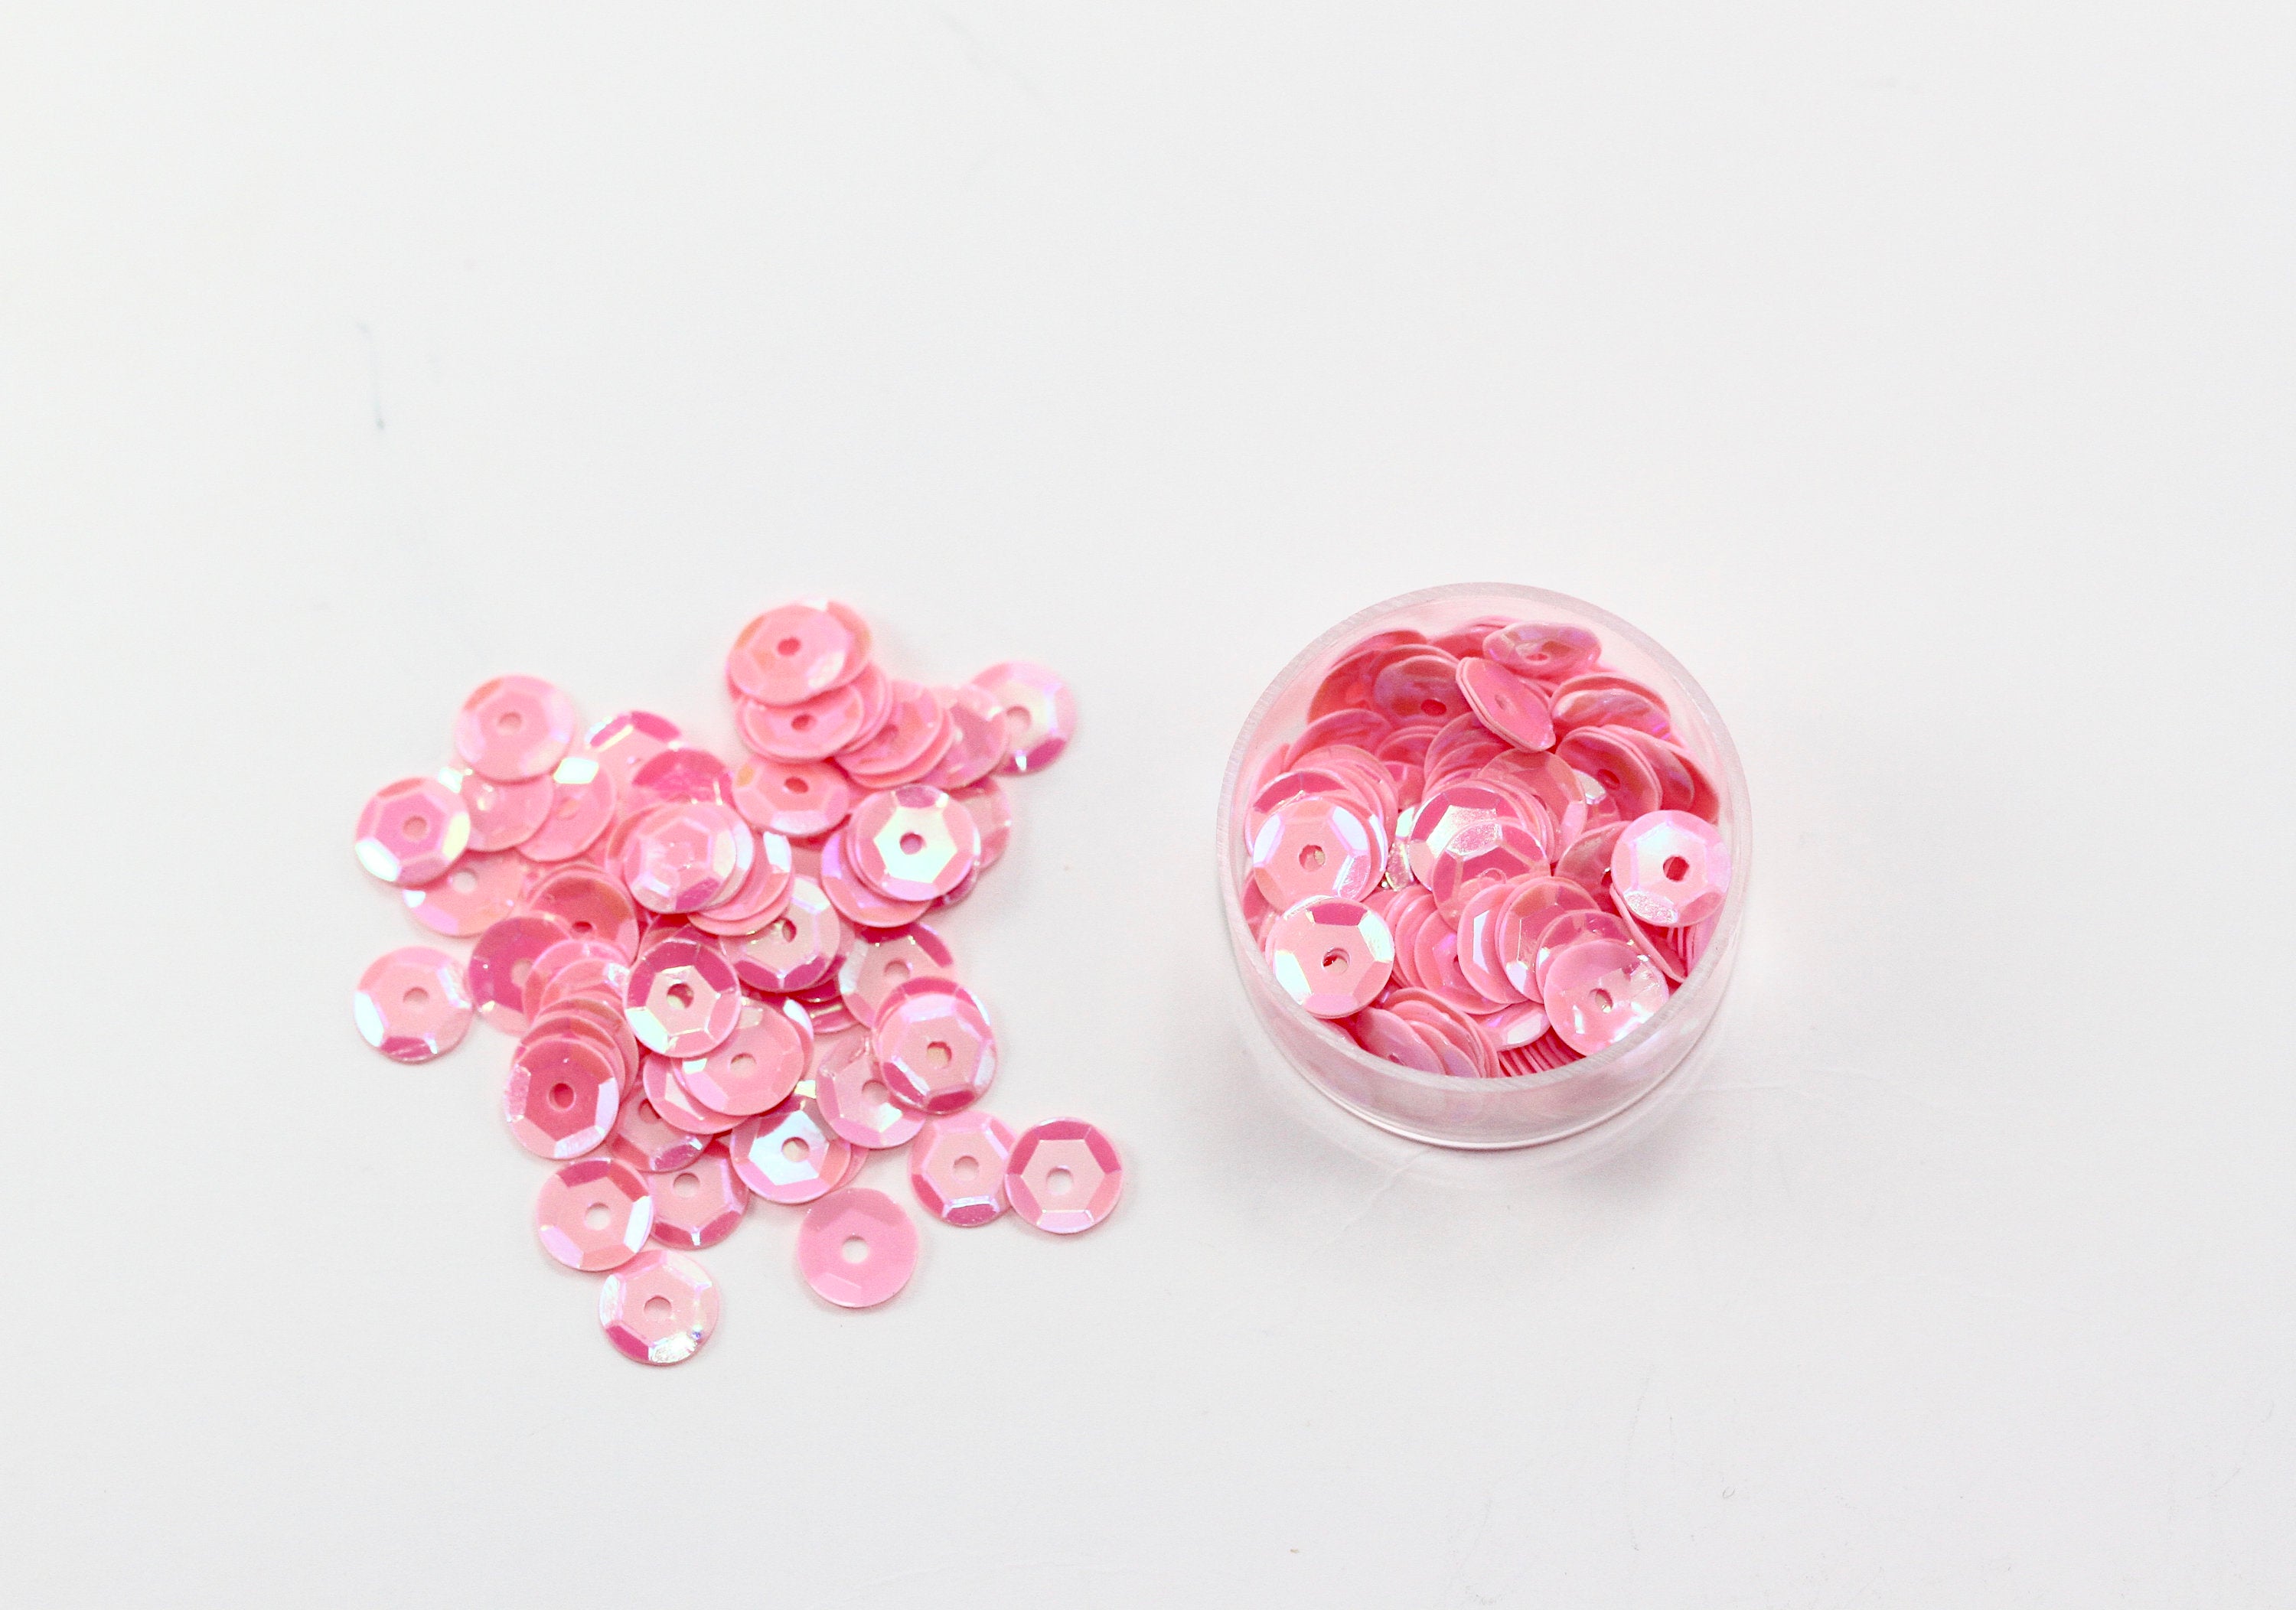 CLEARANCE!!! - 1 pack, Confetti / Sequin in Light Pink